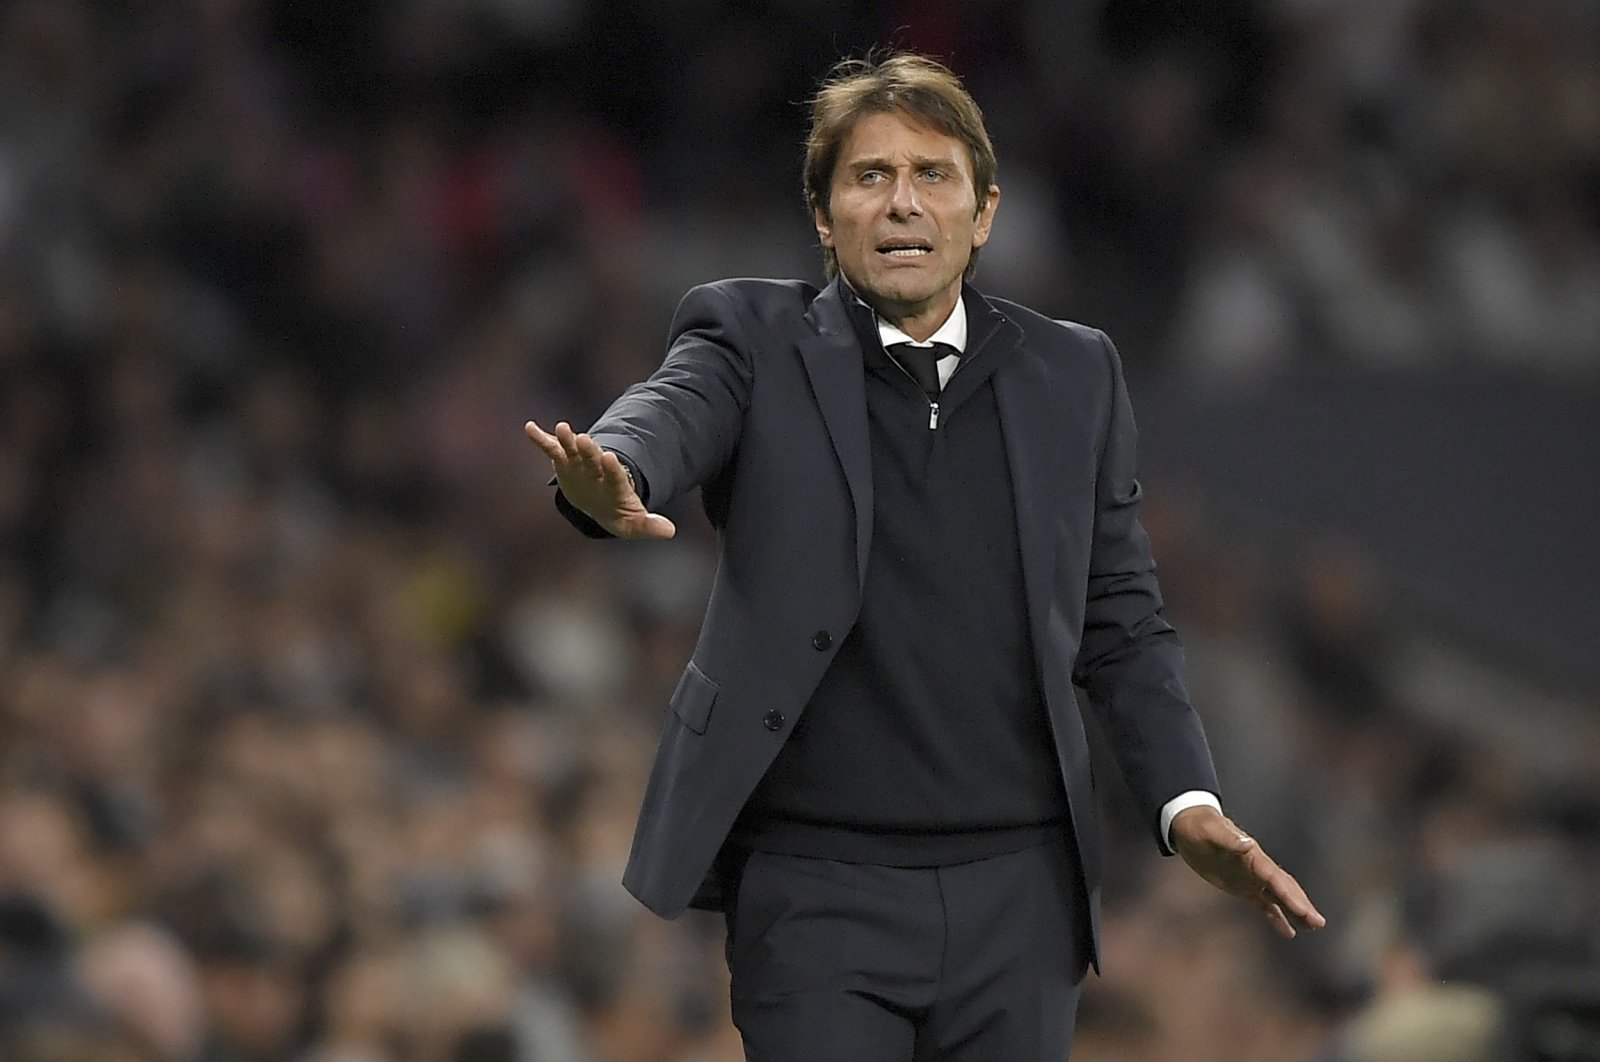 Tottenham manager Antonio Conte reacts during the English Premier League soccer match between Tottenham Hotspur and Leicester City, London, Britain, Sept. 17, 2022. (EPA Photo)